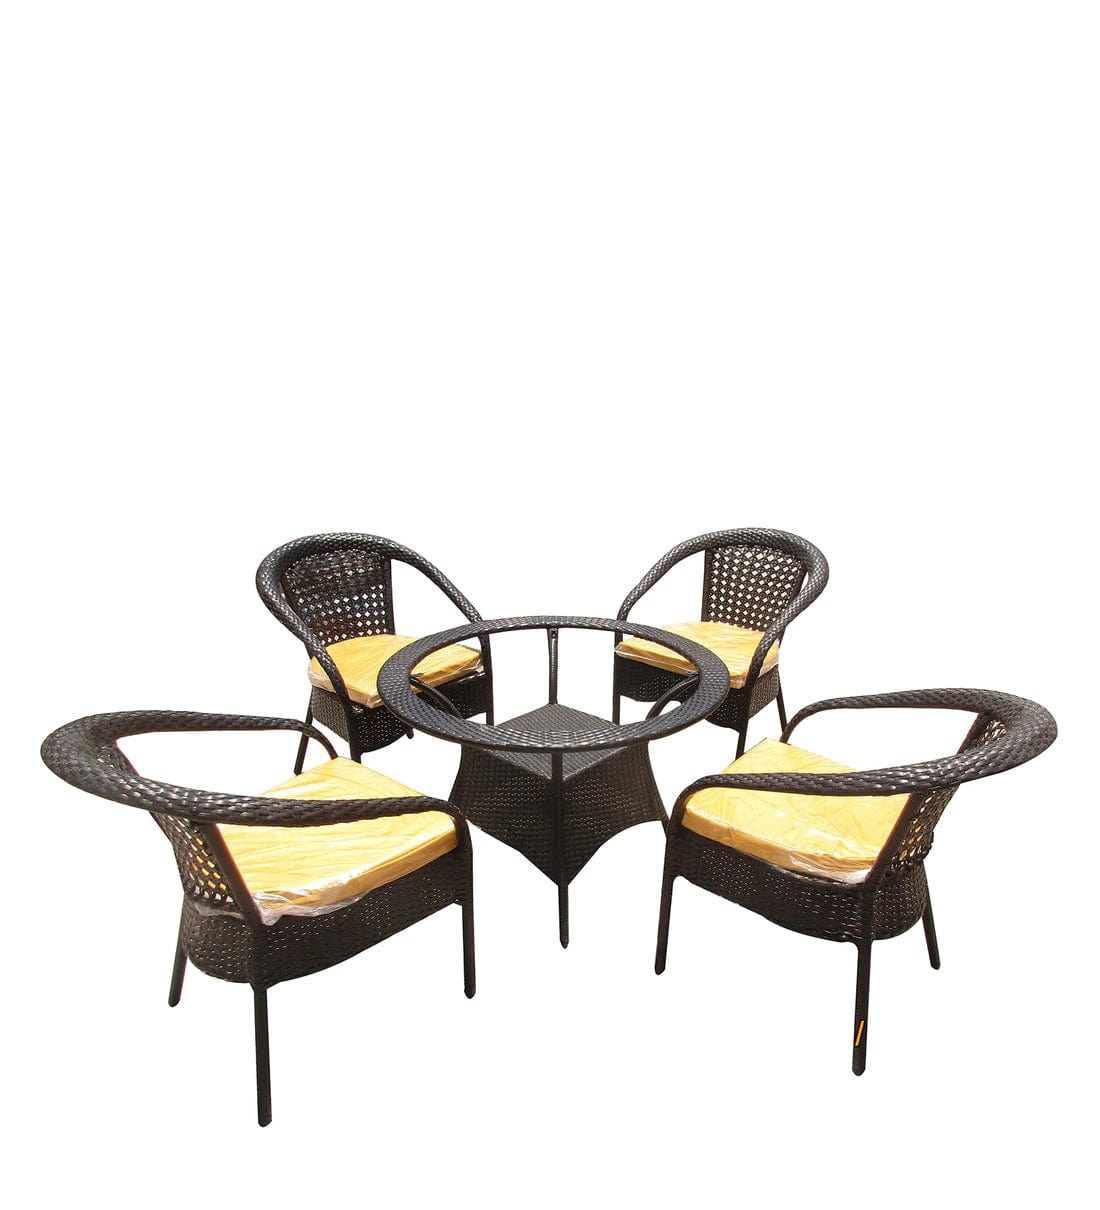 Dreamline Outdoor Furniture Garden Patio Seating Set - 4 Chairs And Table Set Balcony Furniture